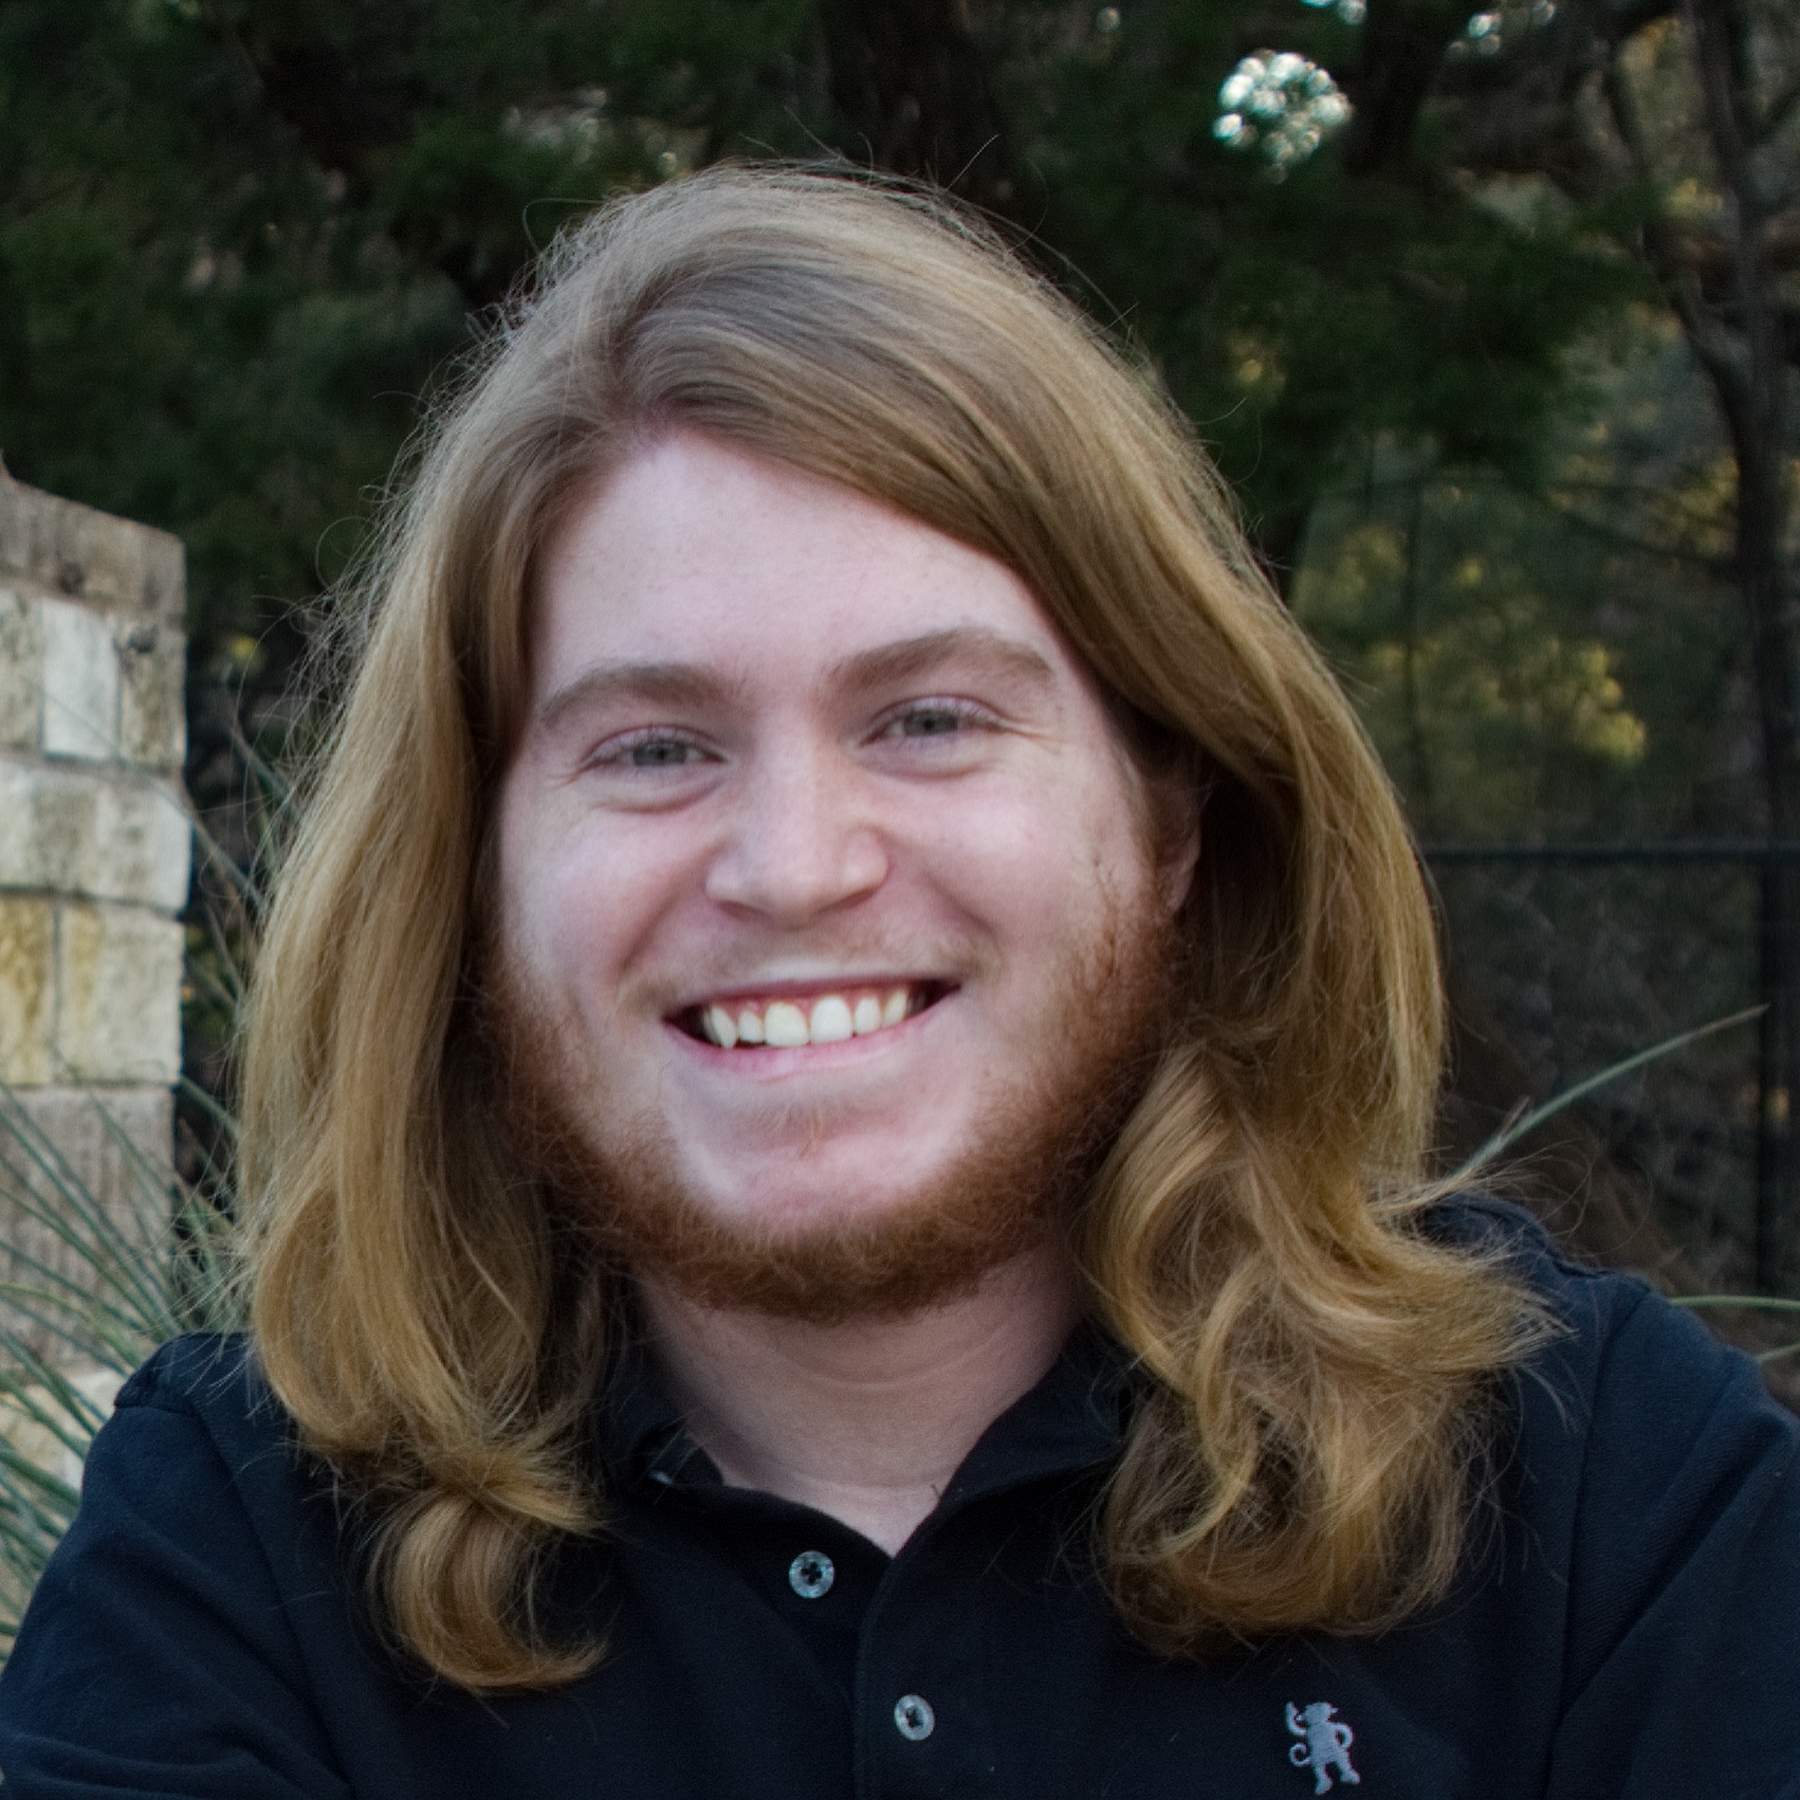 Man with long hair smiling